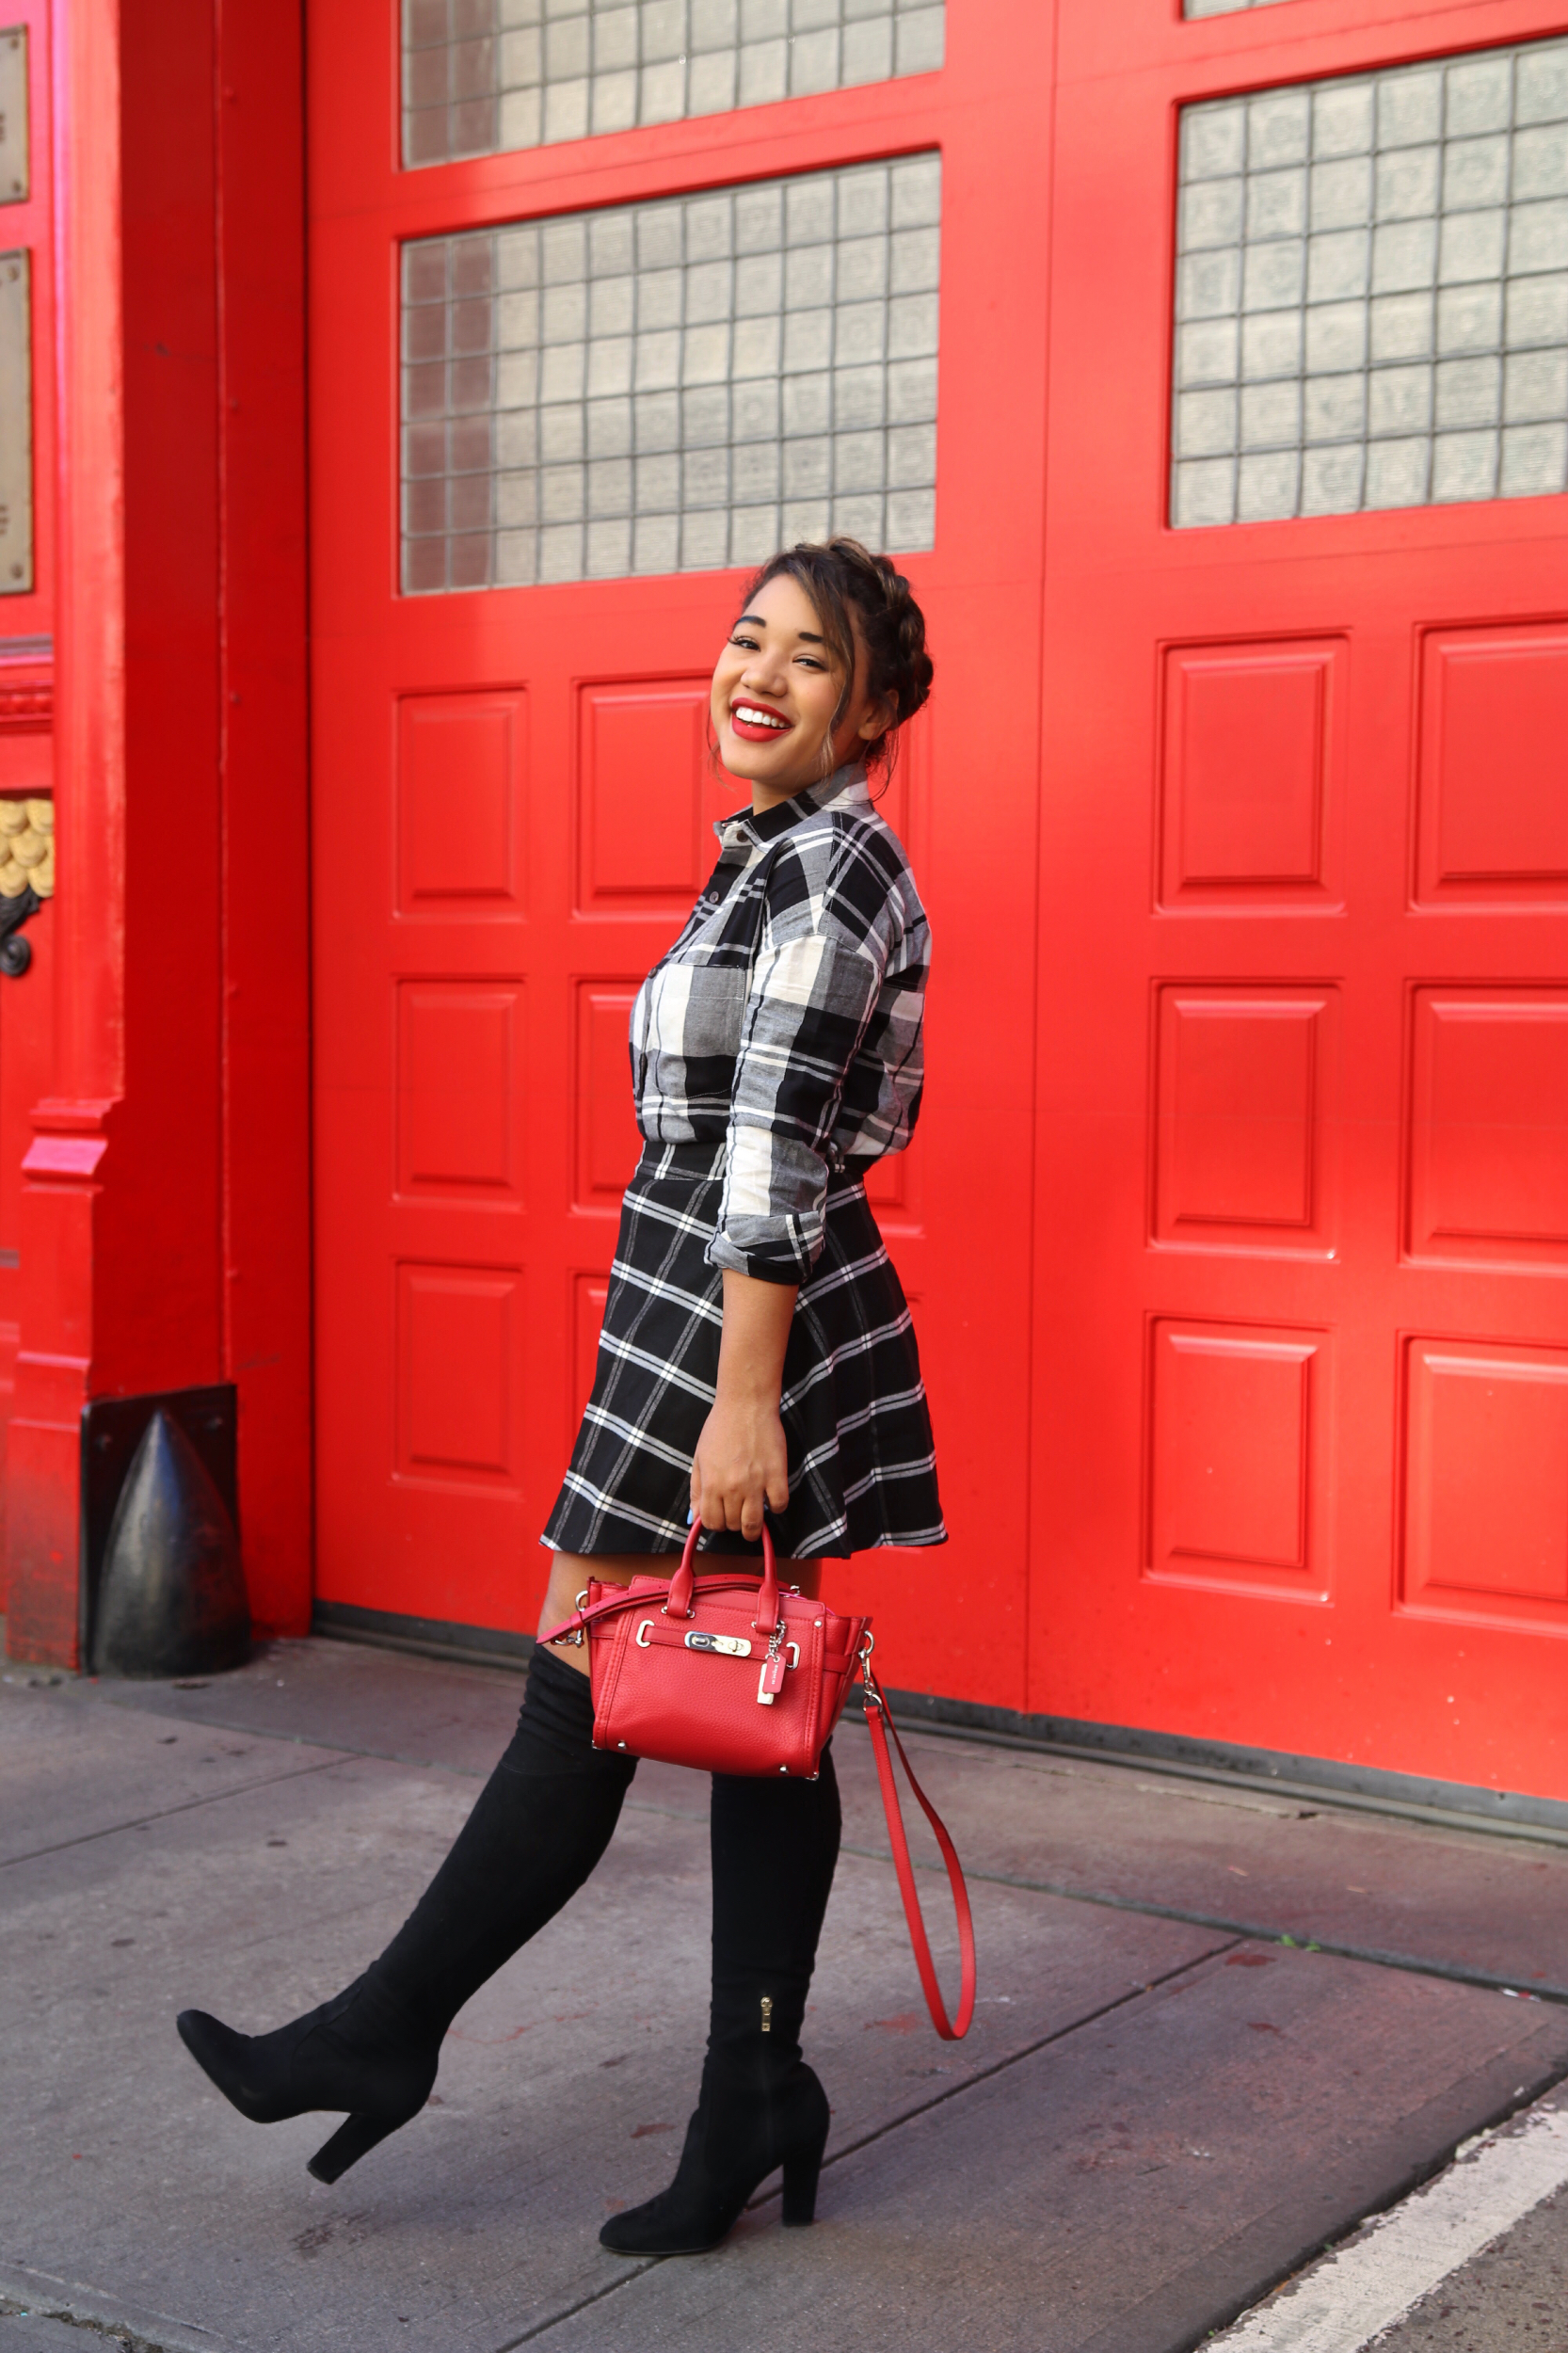 Plaid on Plaid! Fall style by Color Me Courtney (@colormecourtney) // How to wear plaid for fall #plaid #overthekneeboots #otkboot #patternmixing #blackandwhite